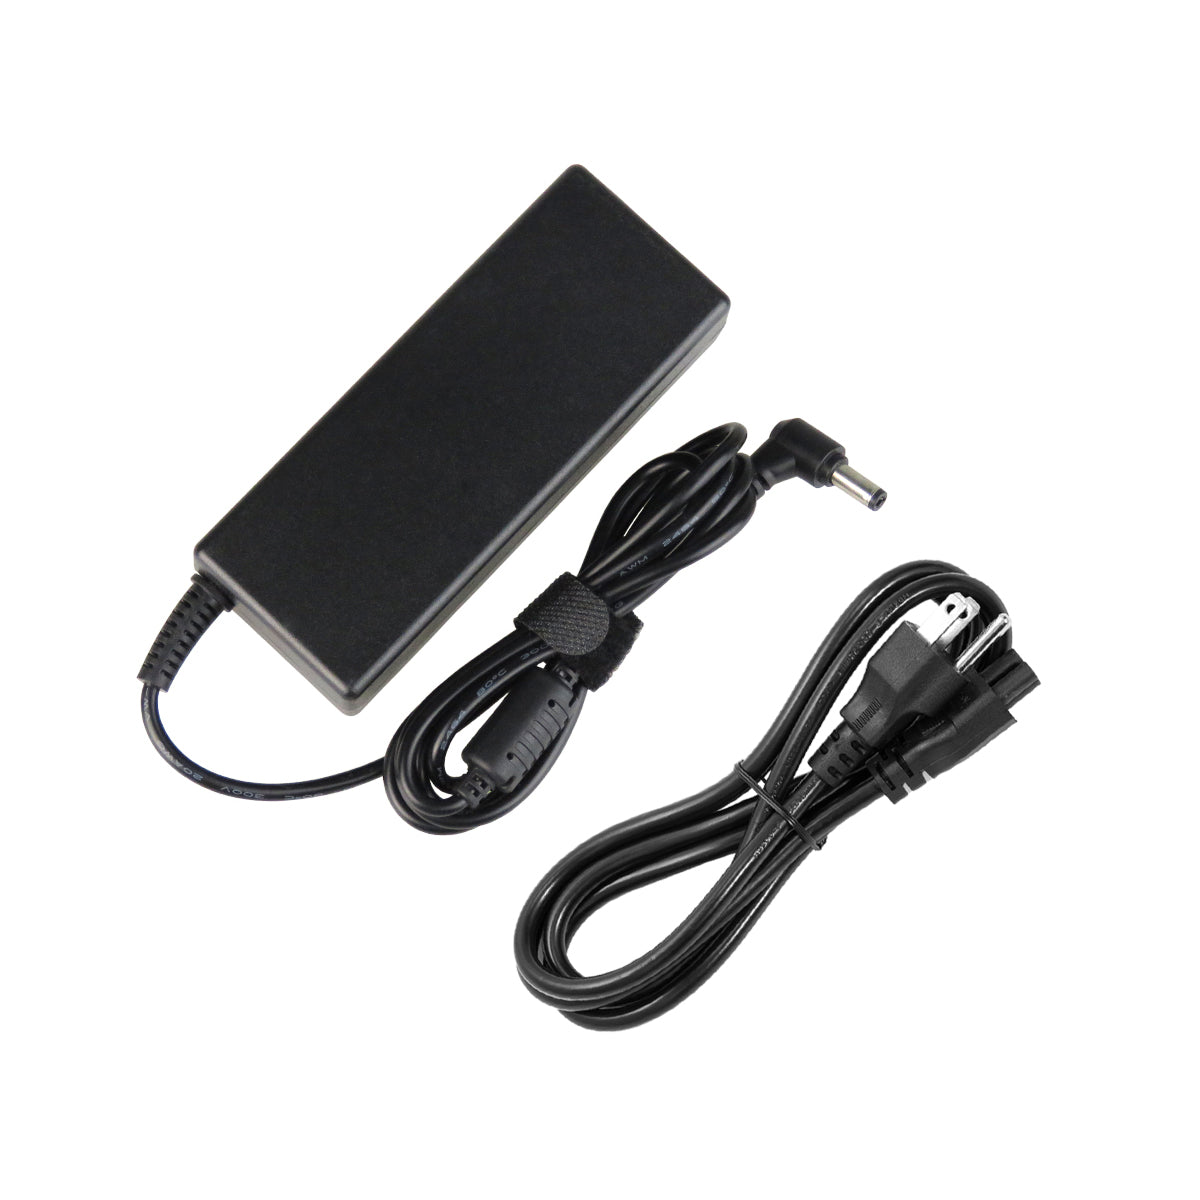 AC Adapter Charger for ASUS N45 Notebook.